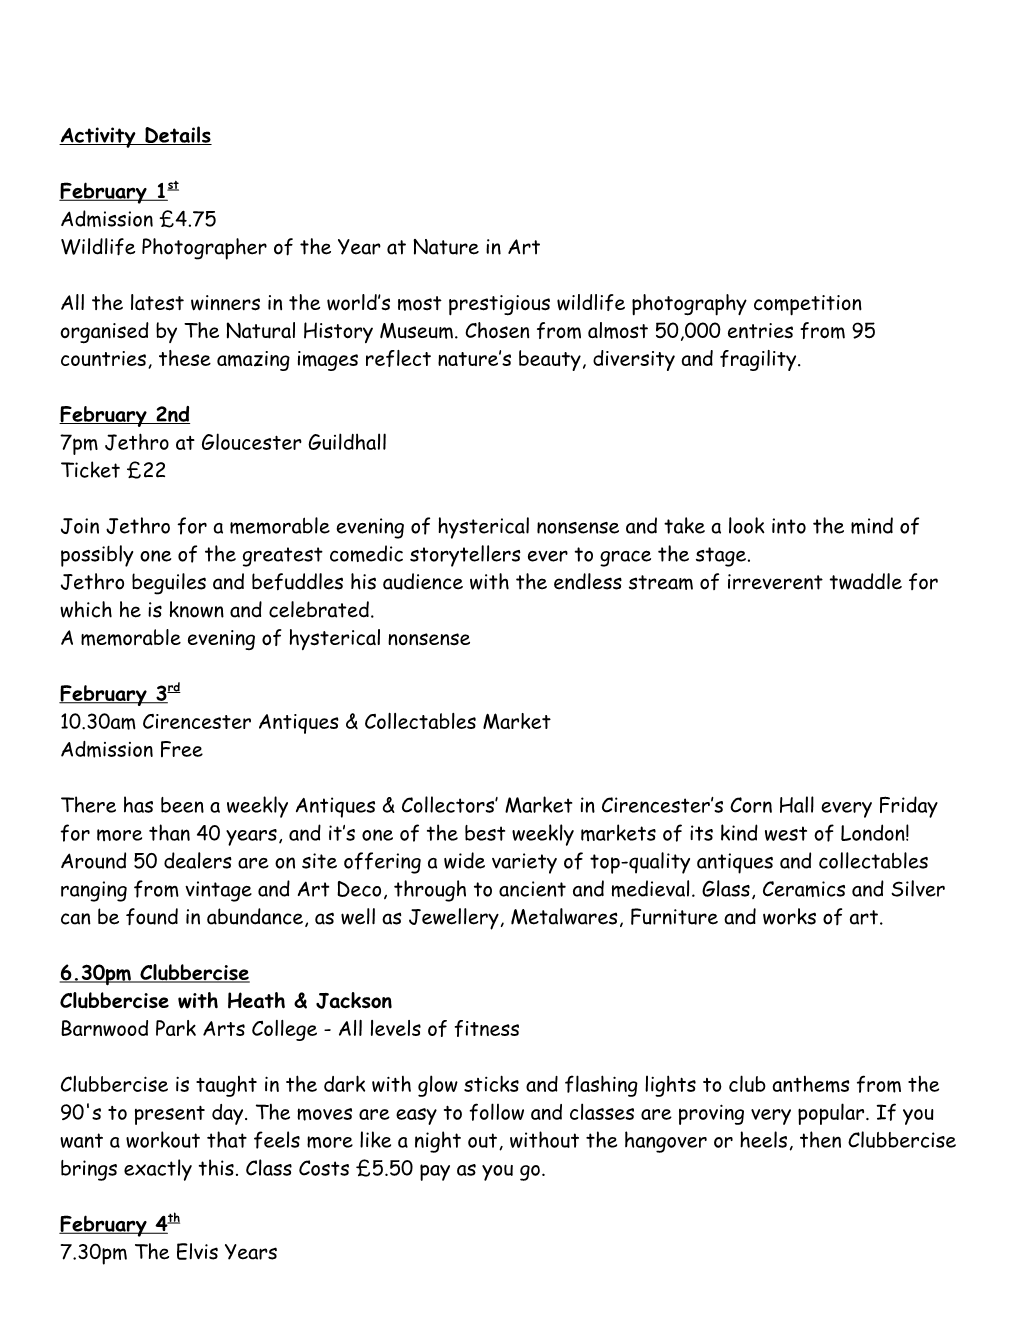 Please Find the February Programme Attached